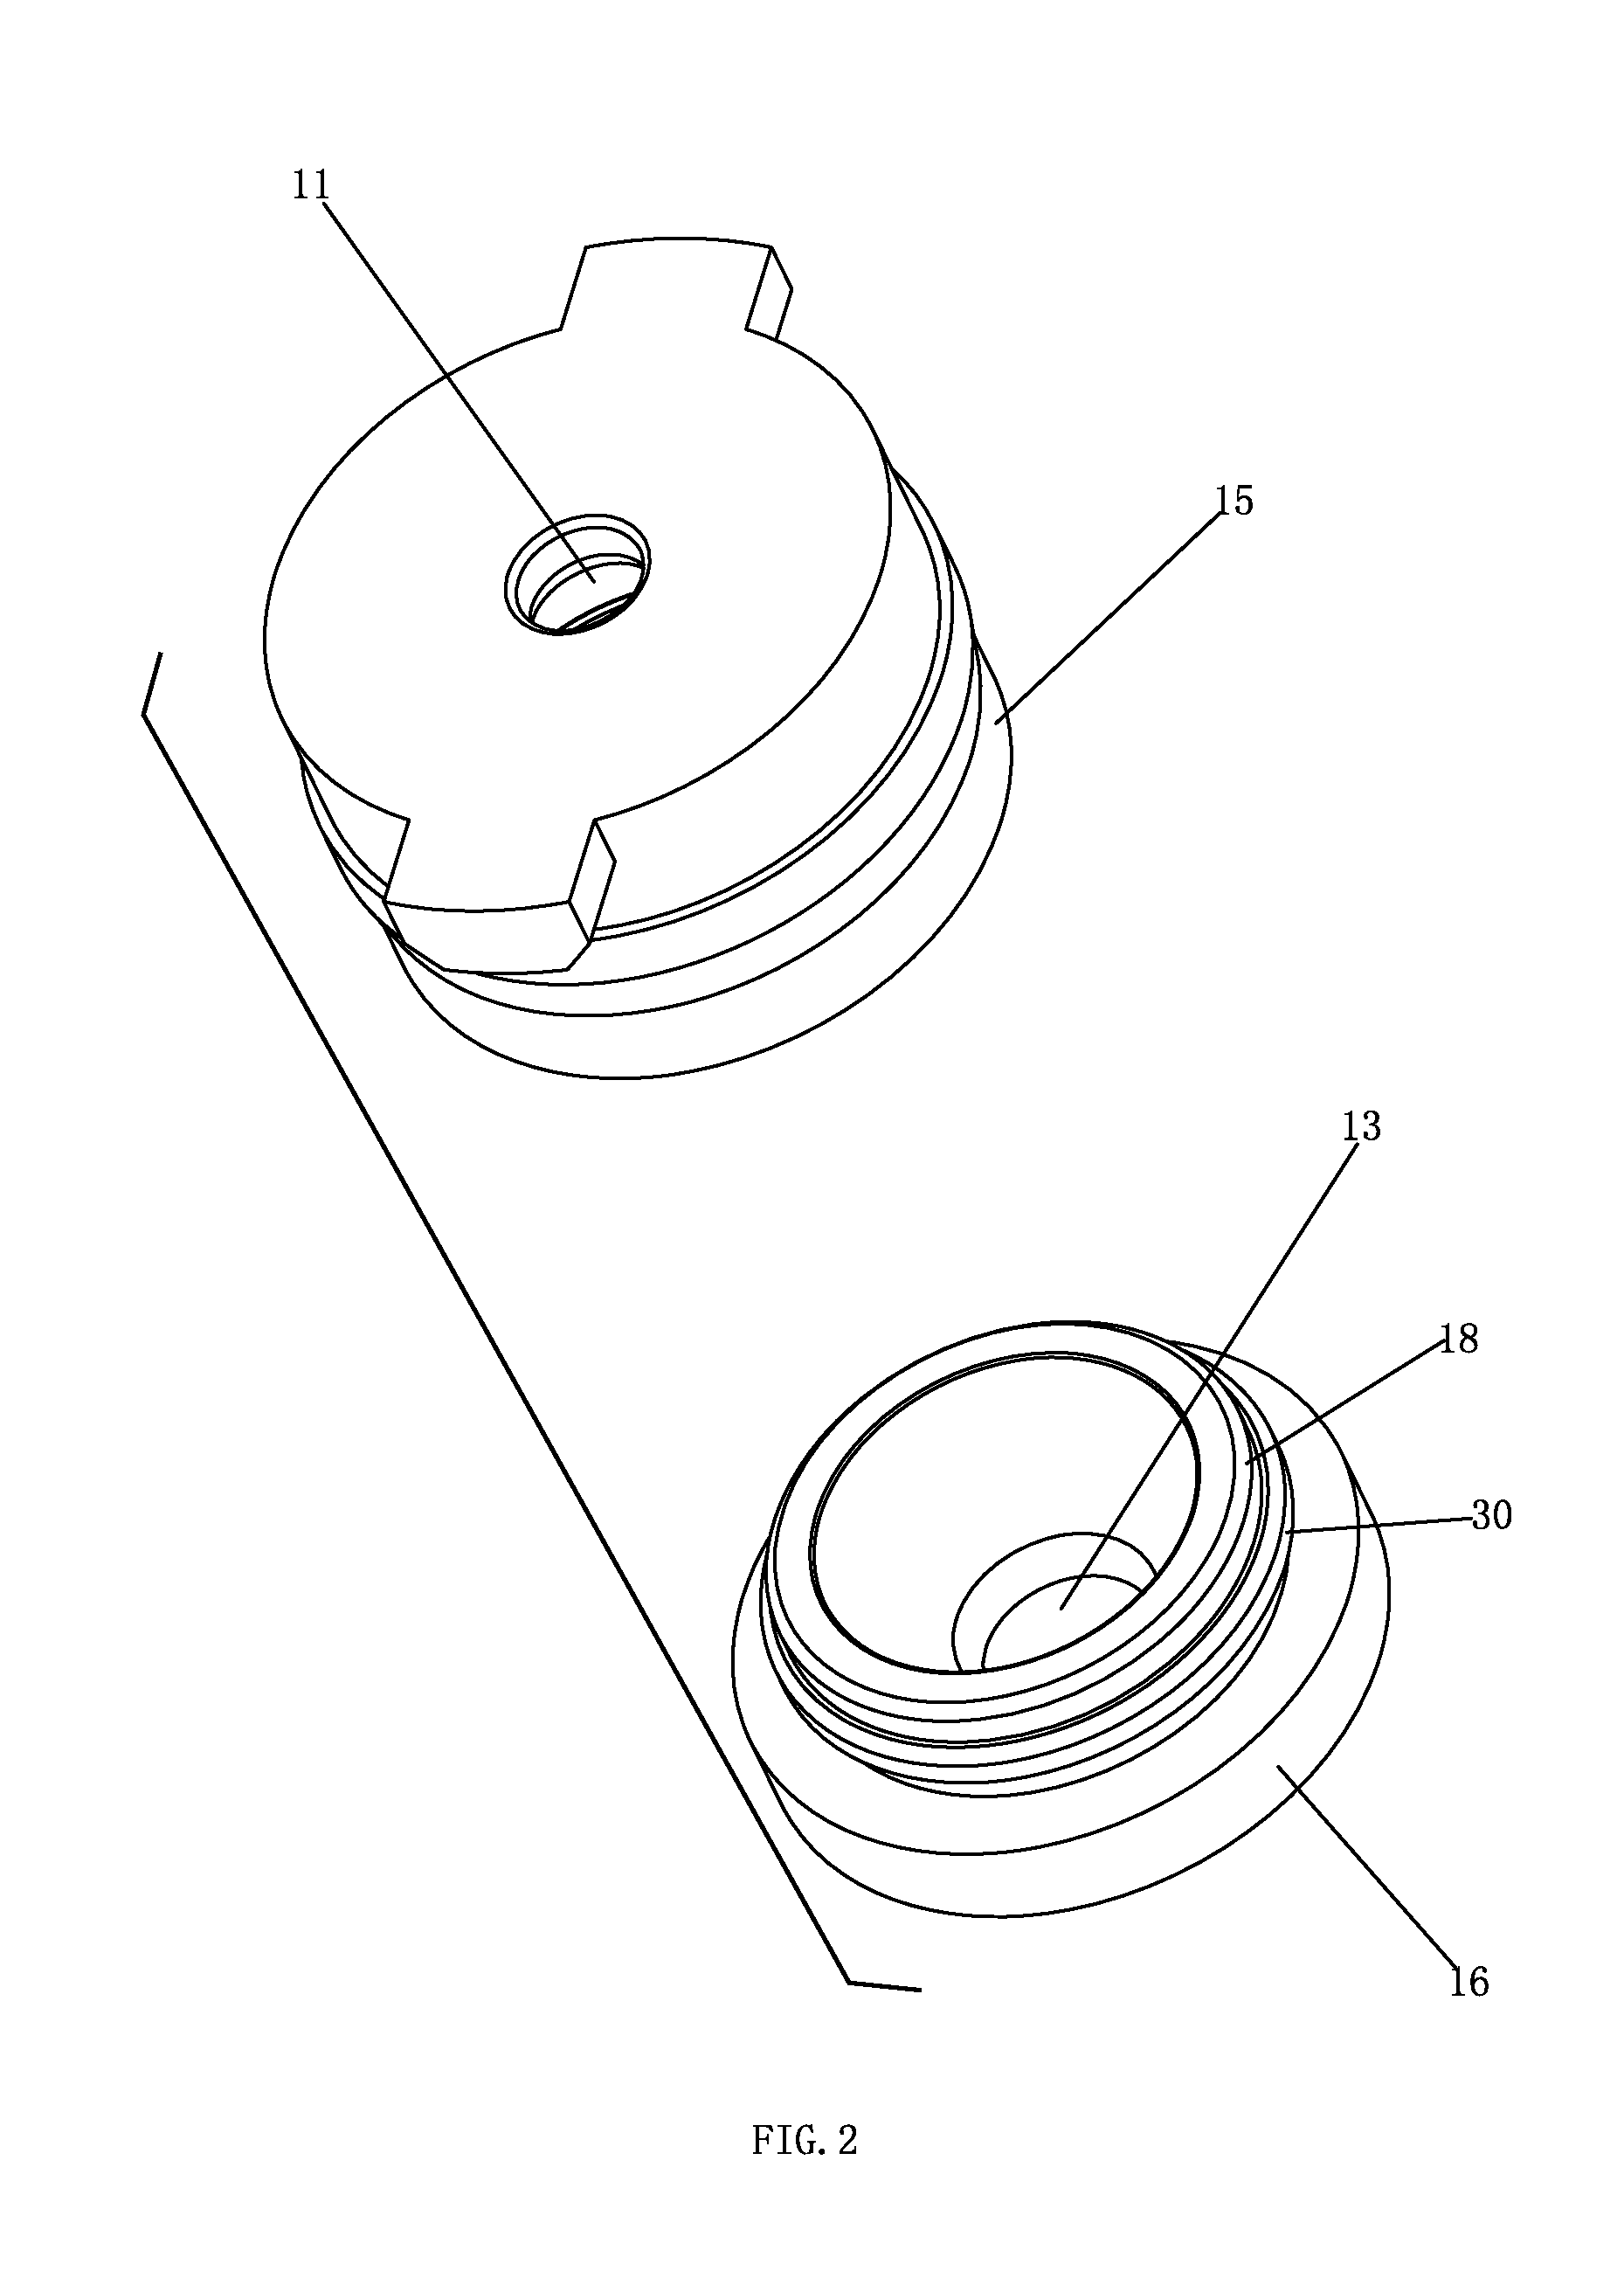 Showerhead with oscillating water